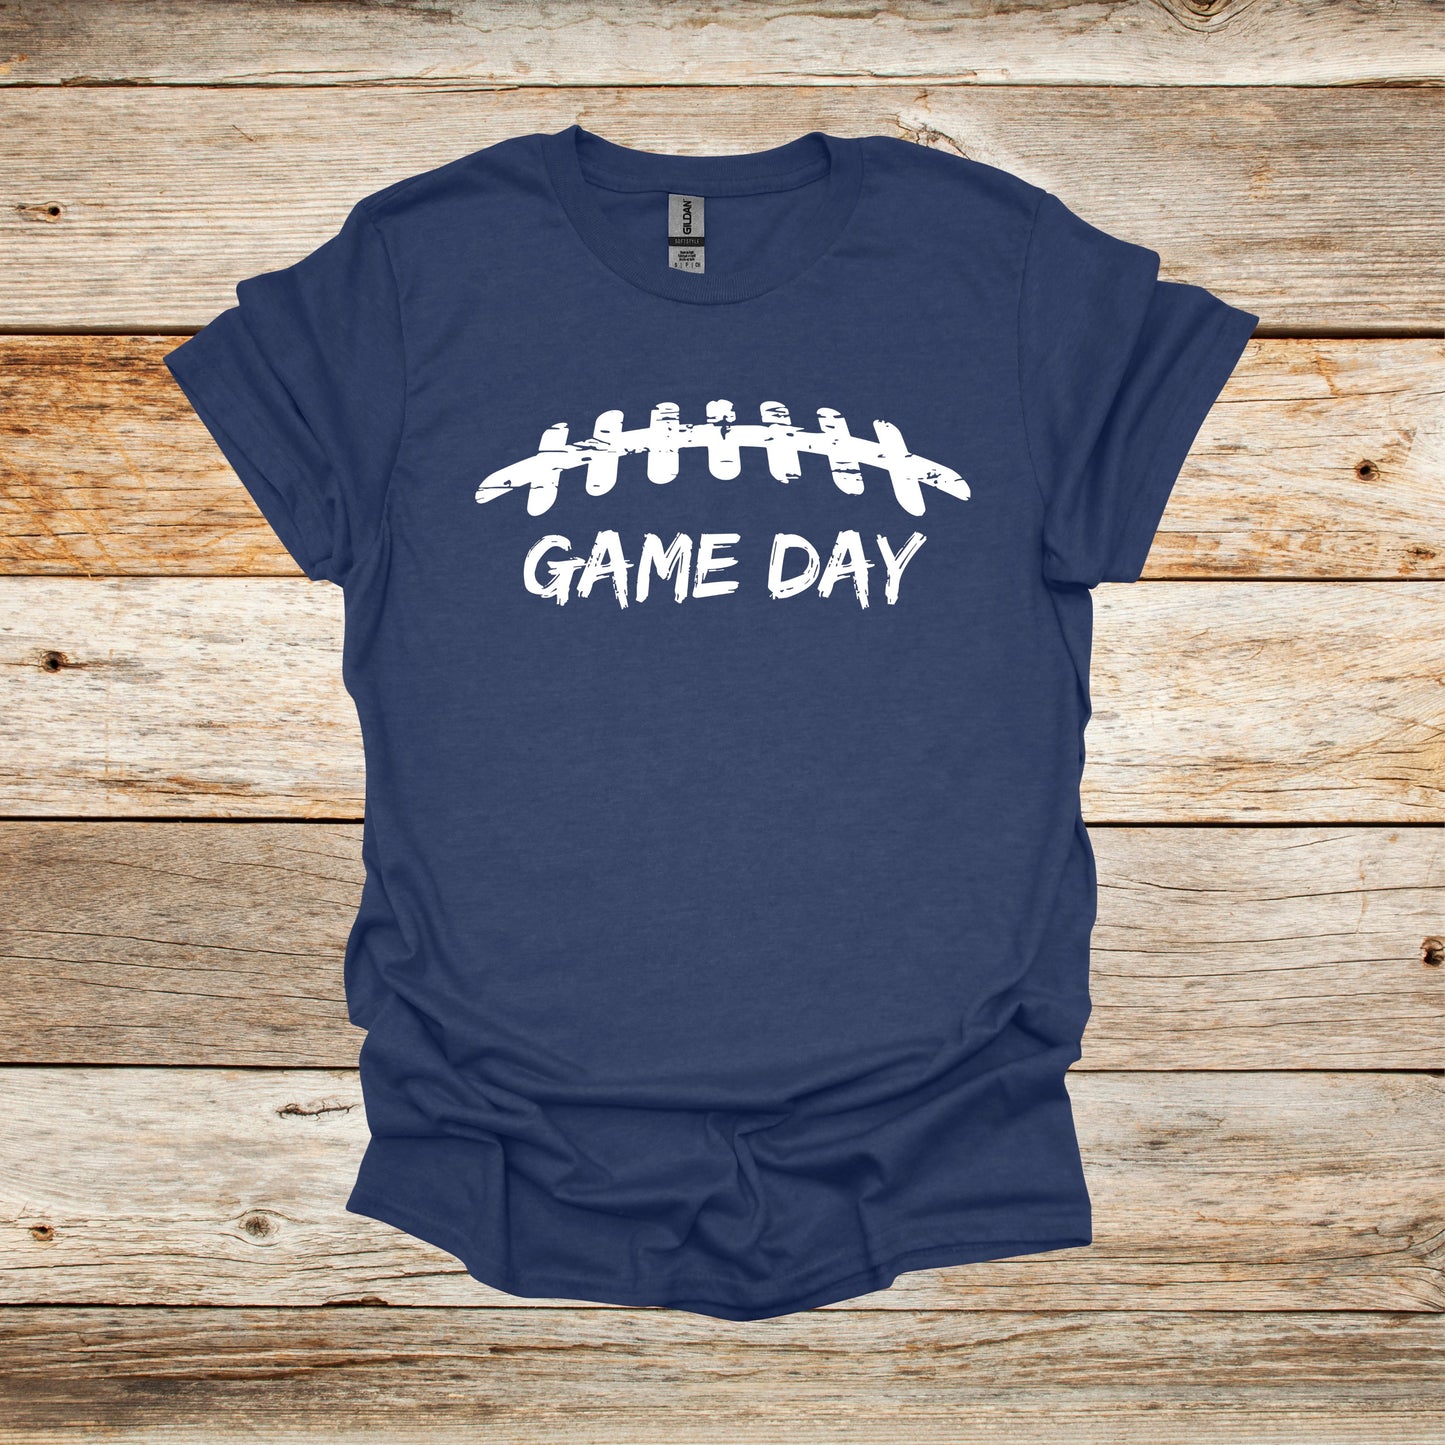 Football T-Shirt - Game Day Laces - Adult and Children's Tee Shirts - Game Day - Sports T-Shirts Graphic Avenue Heather Navy Adult Small 